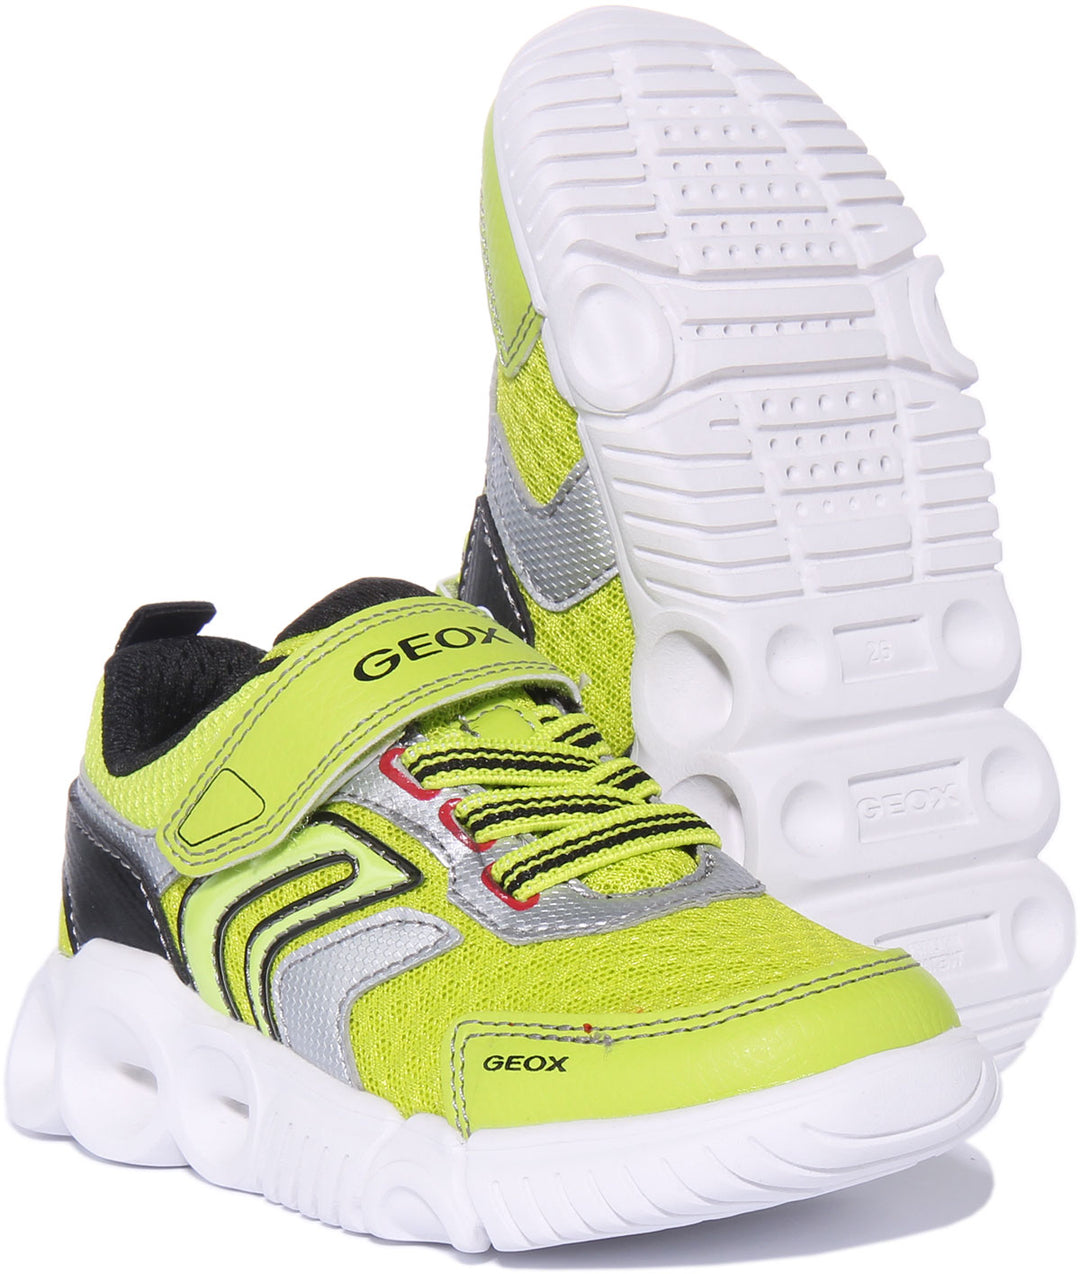 Geox J Wroom In Lime For Kids